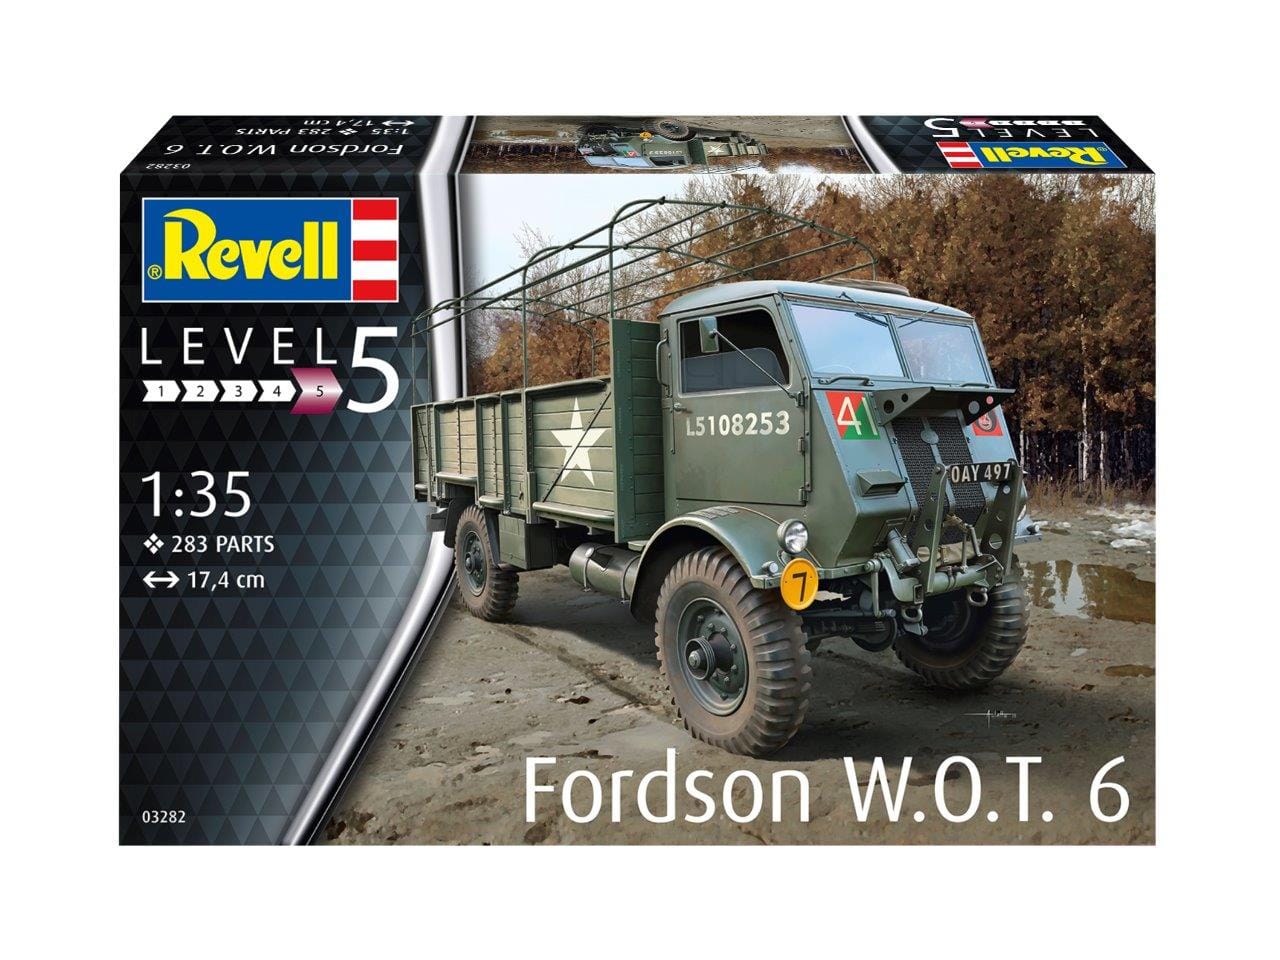 RVG3282 FORDSON WOT 6 (1/35)